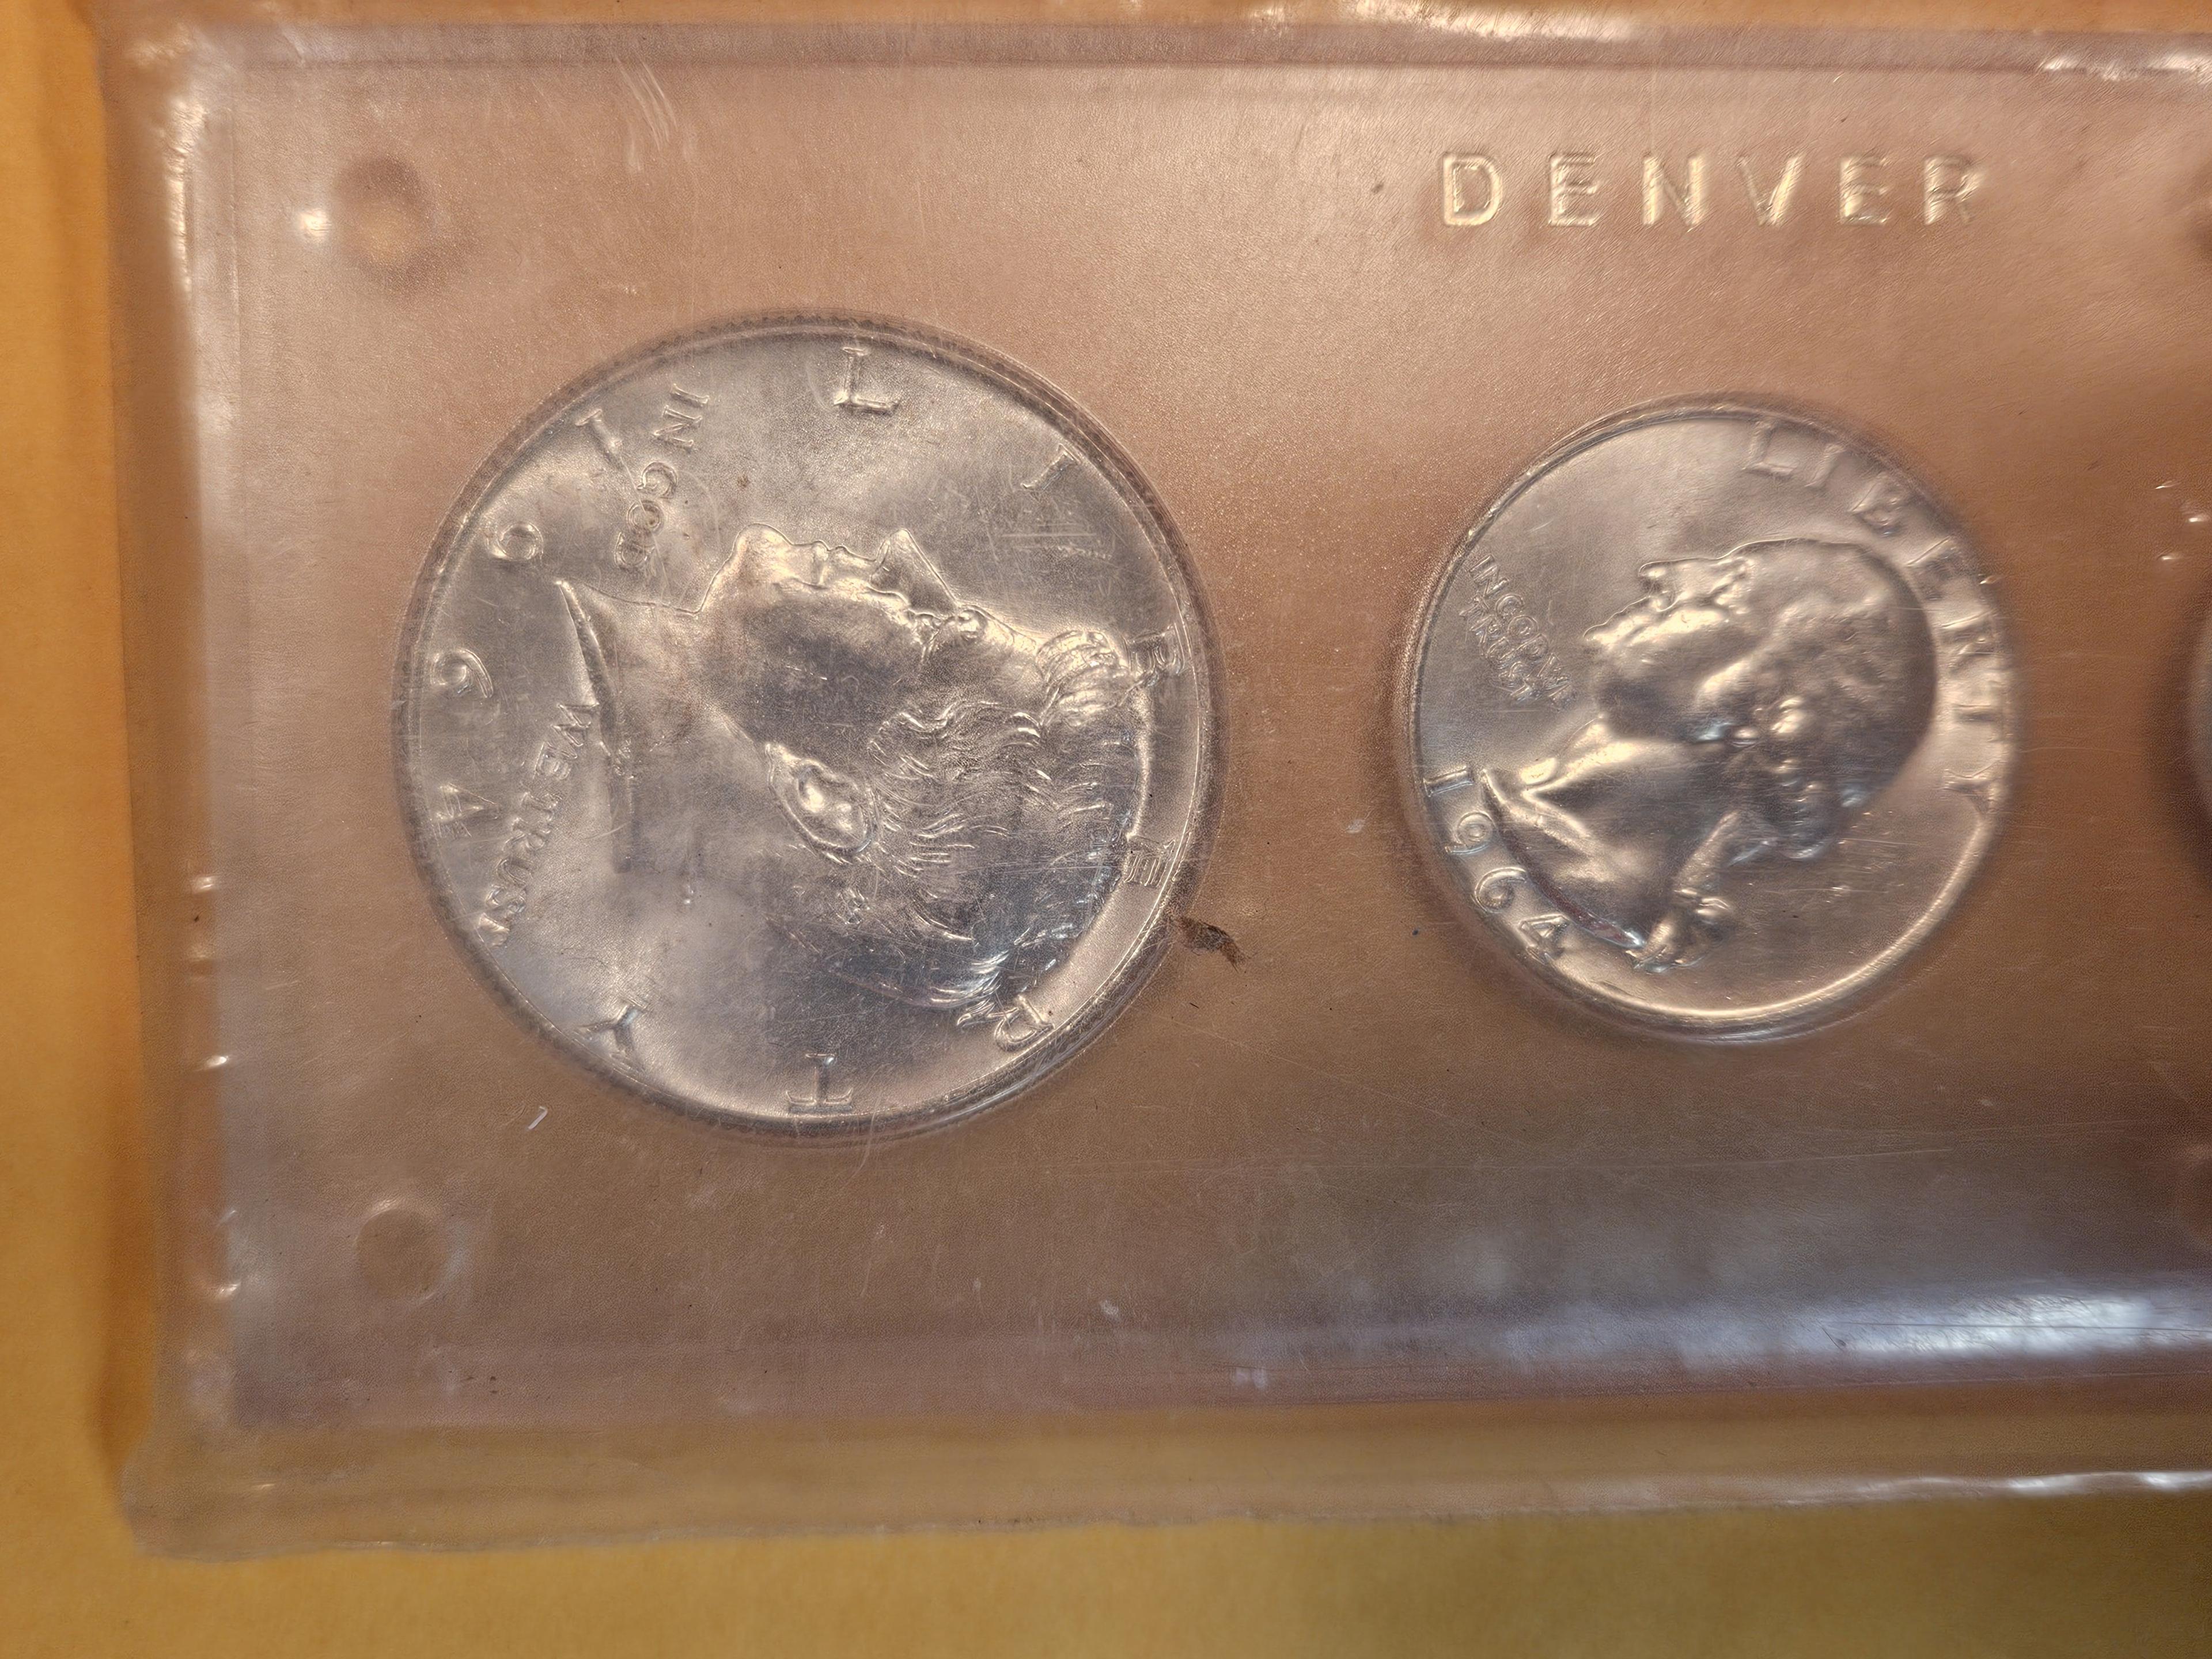 Two Brilliant uncirculated US Coin sets